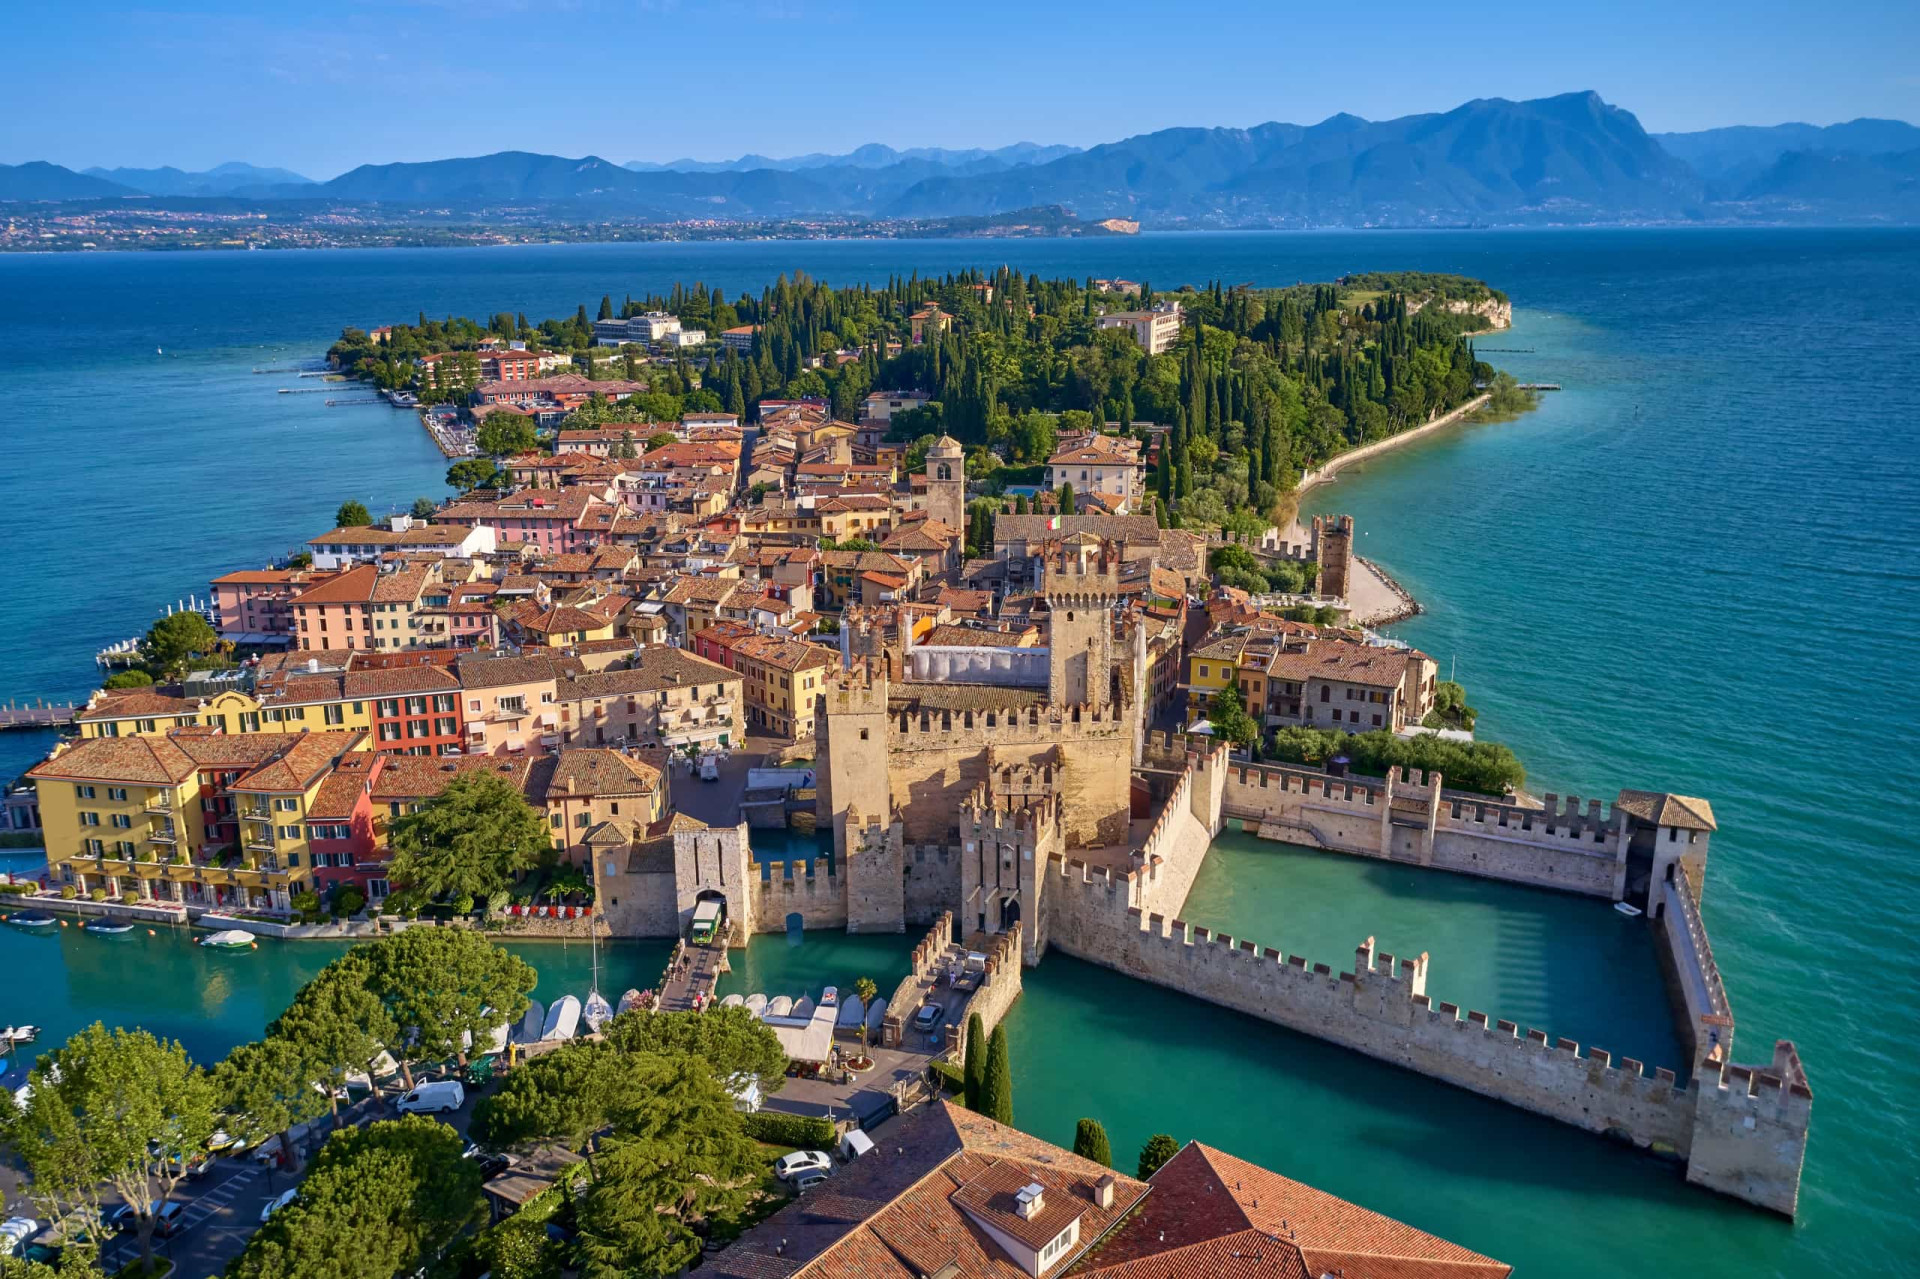 <p>The historical center of Sirmione, a town in the province of Brescia, is set on the Sirmio peninsula, which juts out into Lake Garda. It's one of the most scenic destinations in Italy.</p>